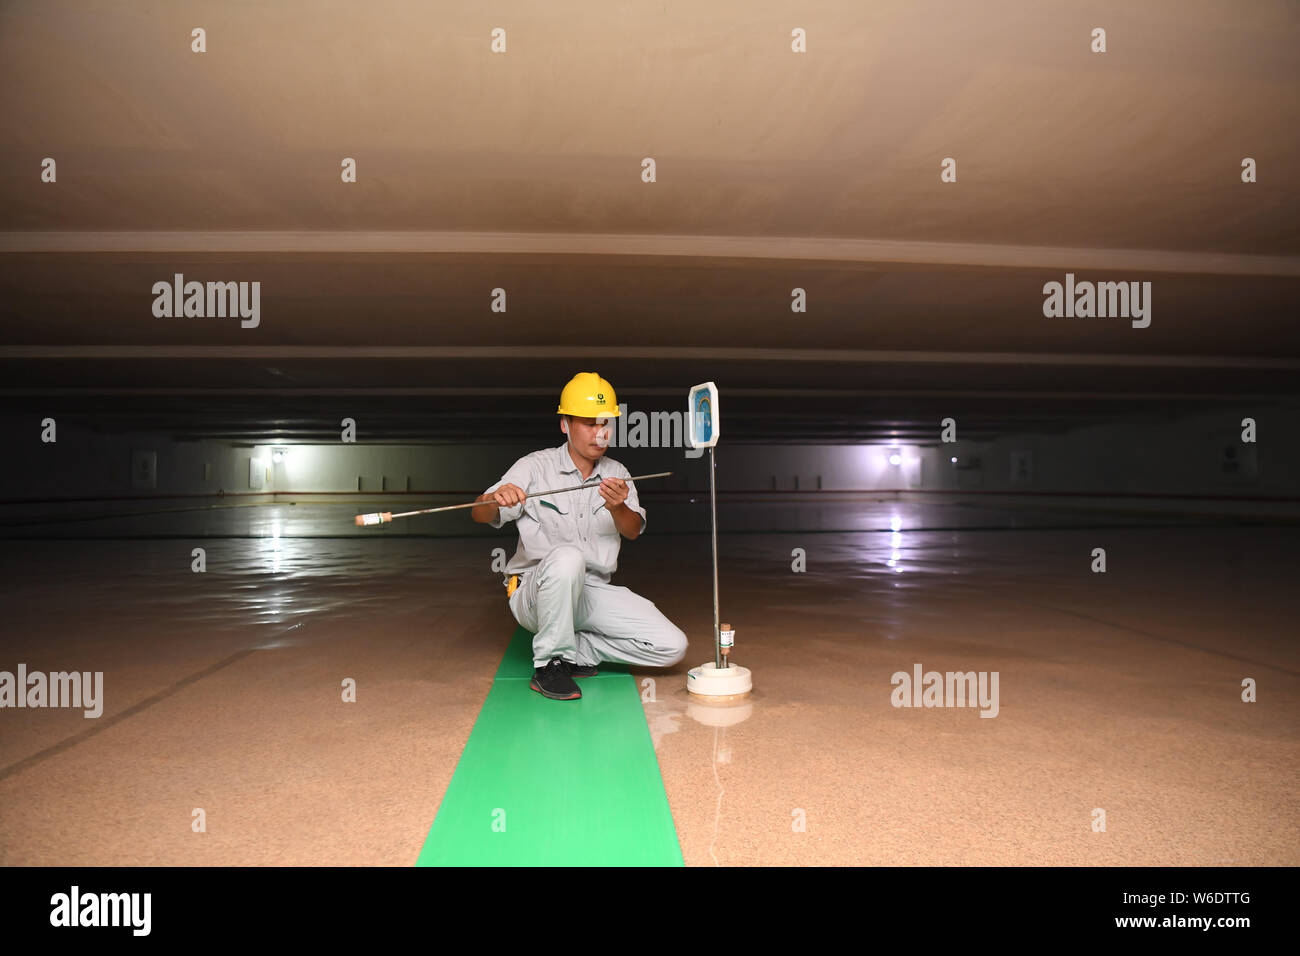 Changsha, China's Hunan Province. 30th July, 2019. A worker from Ningxiang subordinated storehouse of China's state grain stockpiler Sinograin checks the temperature of the grain in Ningxiang, central China's Hunan Province, July 30, 2019. The sampling inspection is applied to ensure the quality of the grain being stored, followed by a series of advanced technologies used to keep the grain from deterioration. Credit: Xue Yuge/Xinhua/Alamy Live News Stock Photo